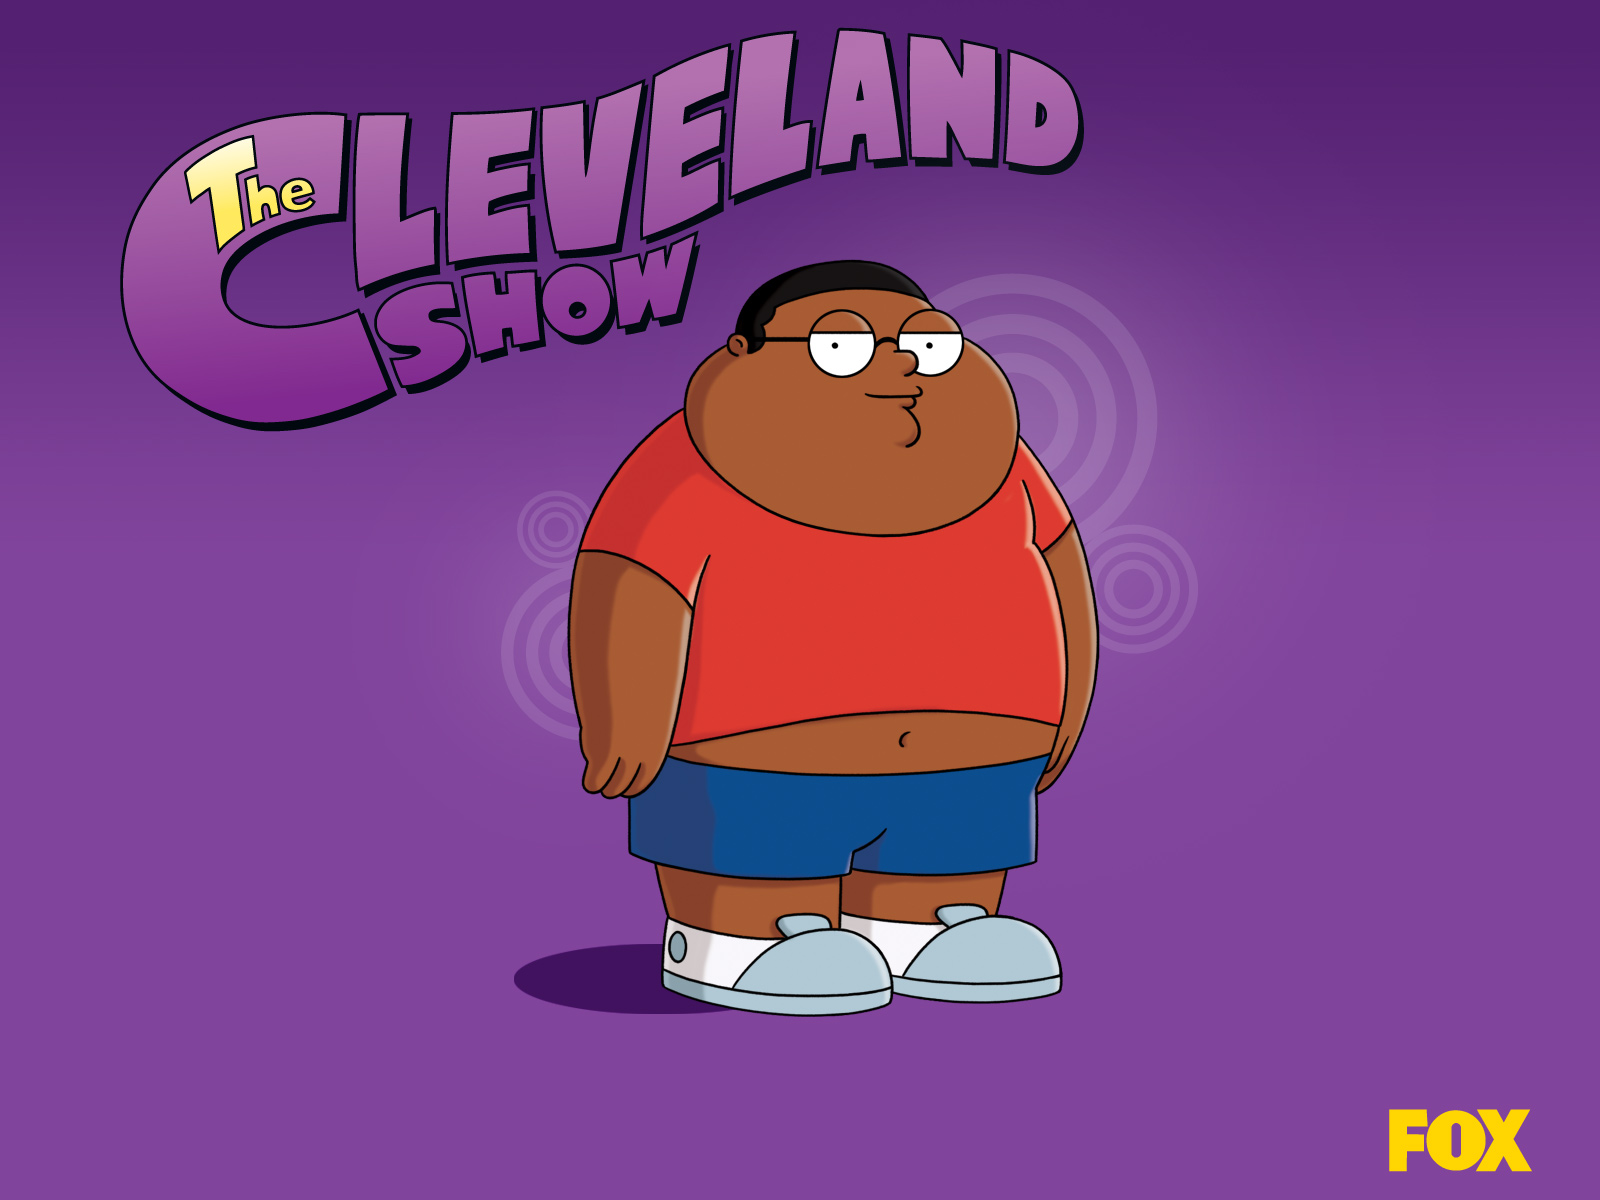 The Cleveland Show | Free Desktop Wallpapers for HD, Widescreen ...